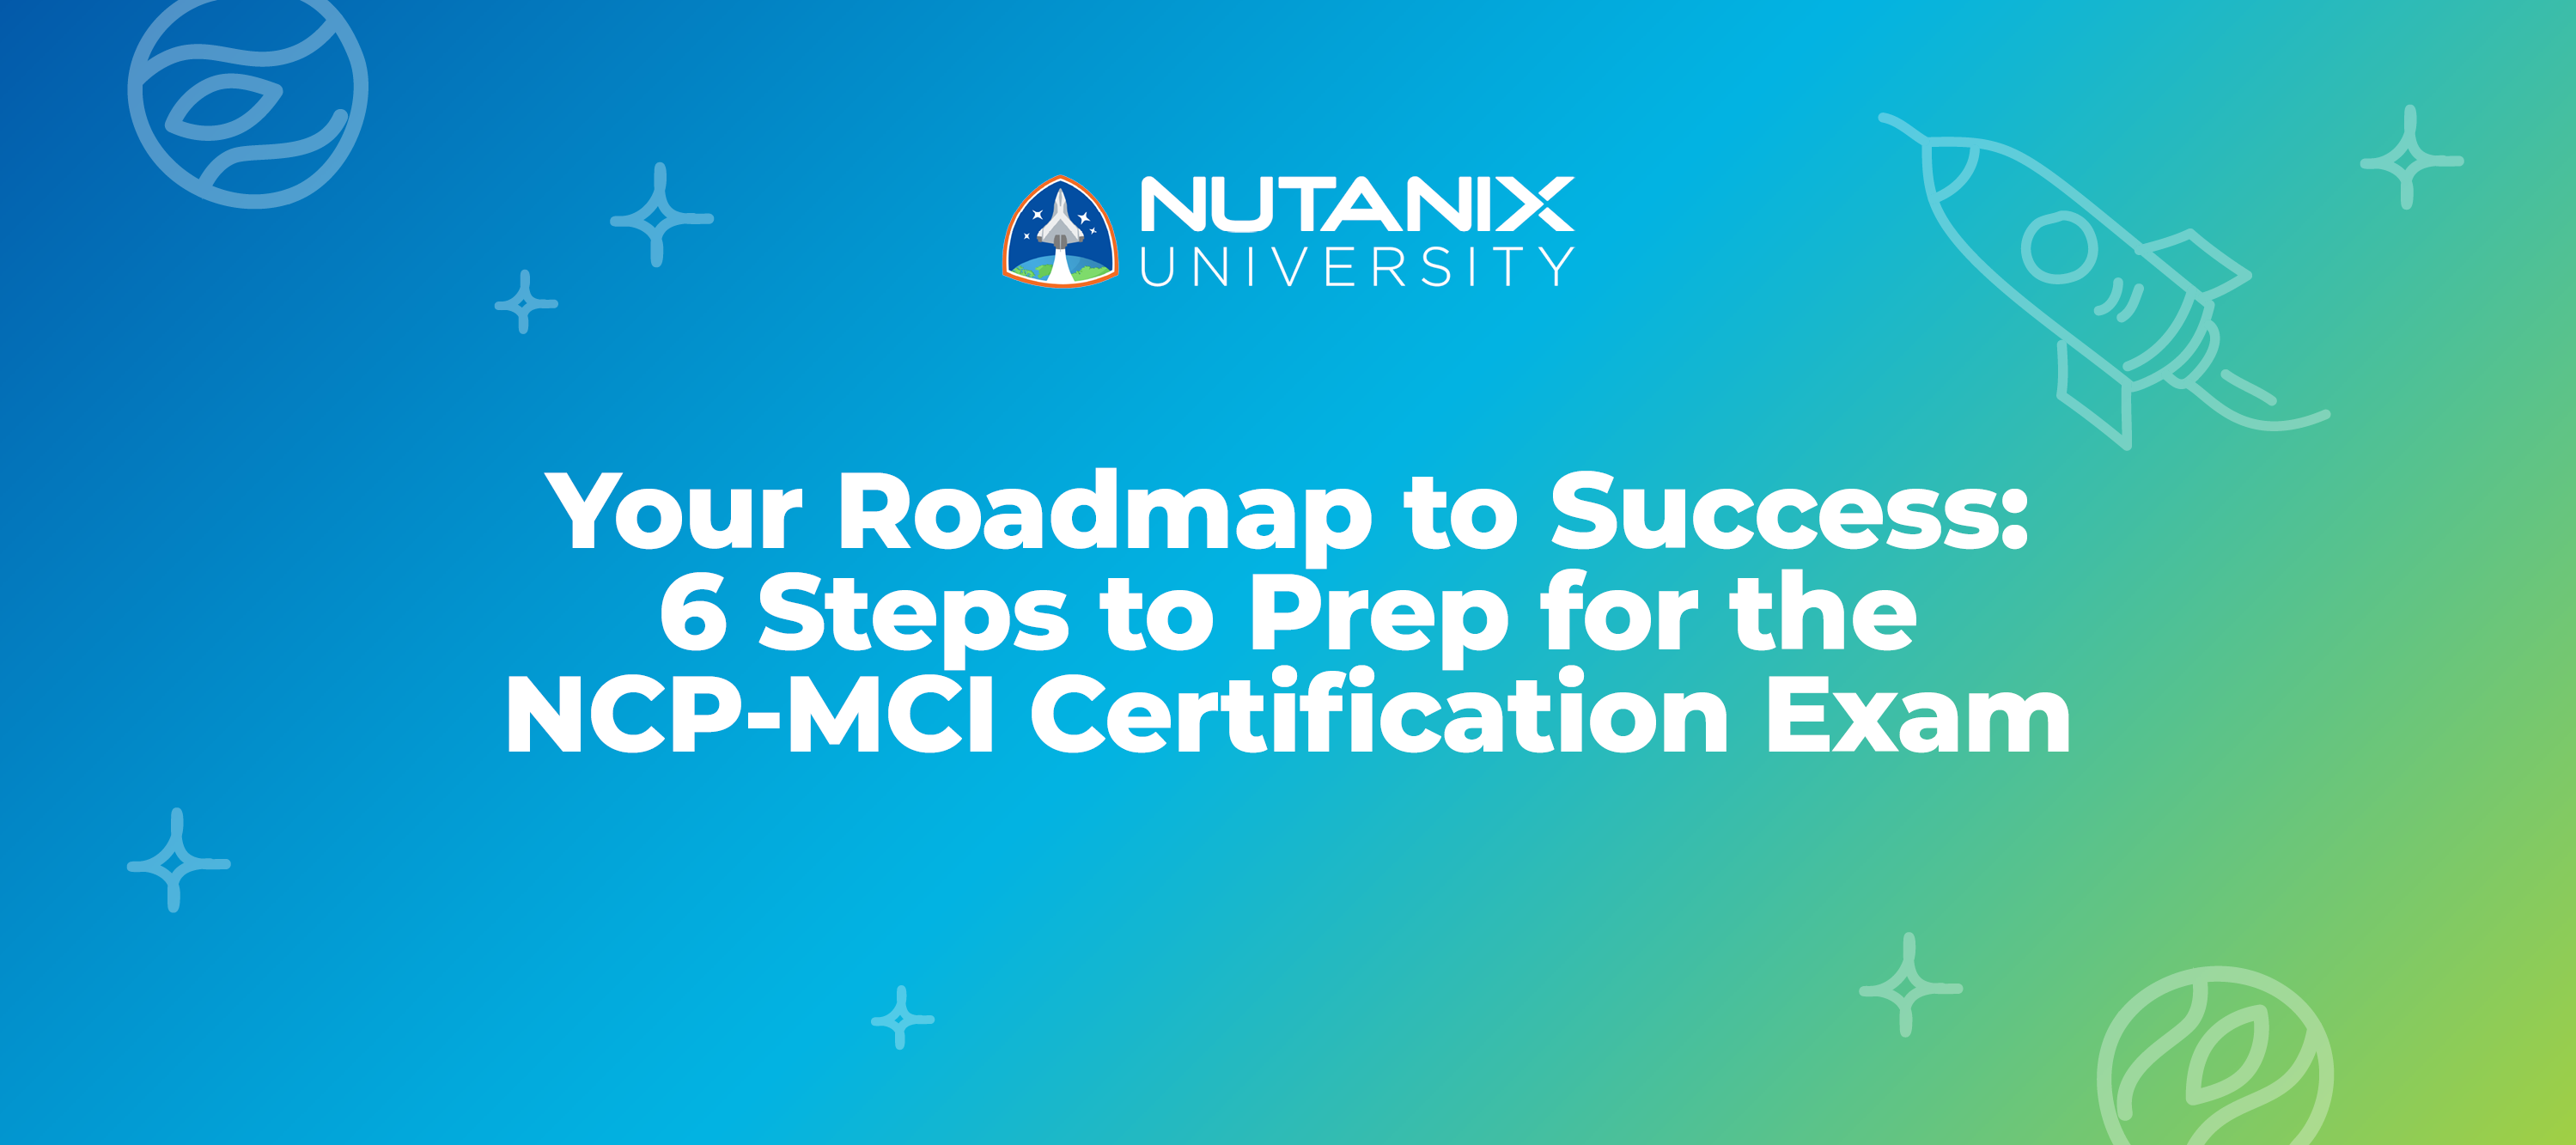 Your Roadmap to Success: 6 Steps to Prep for the NCP-MCI Certification Exam